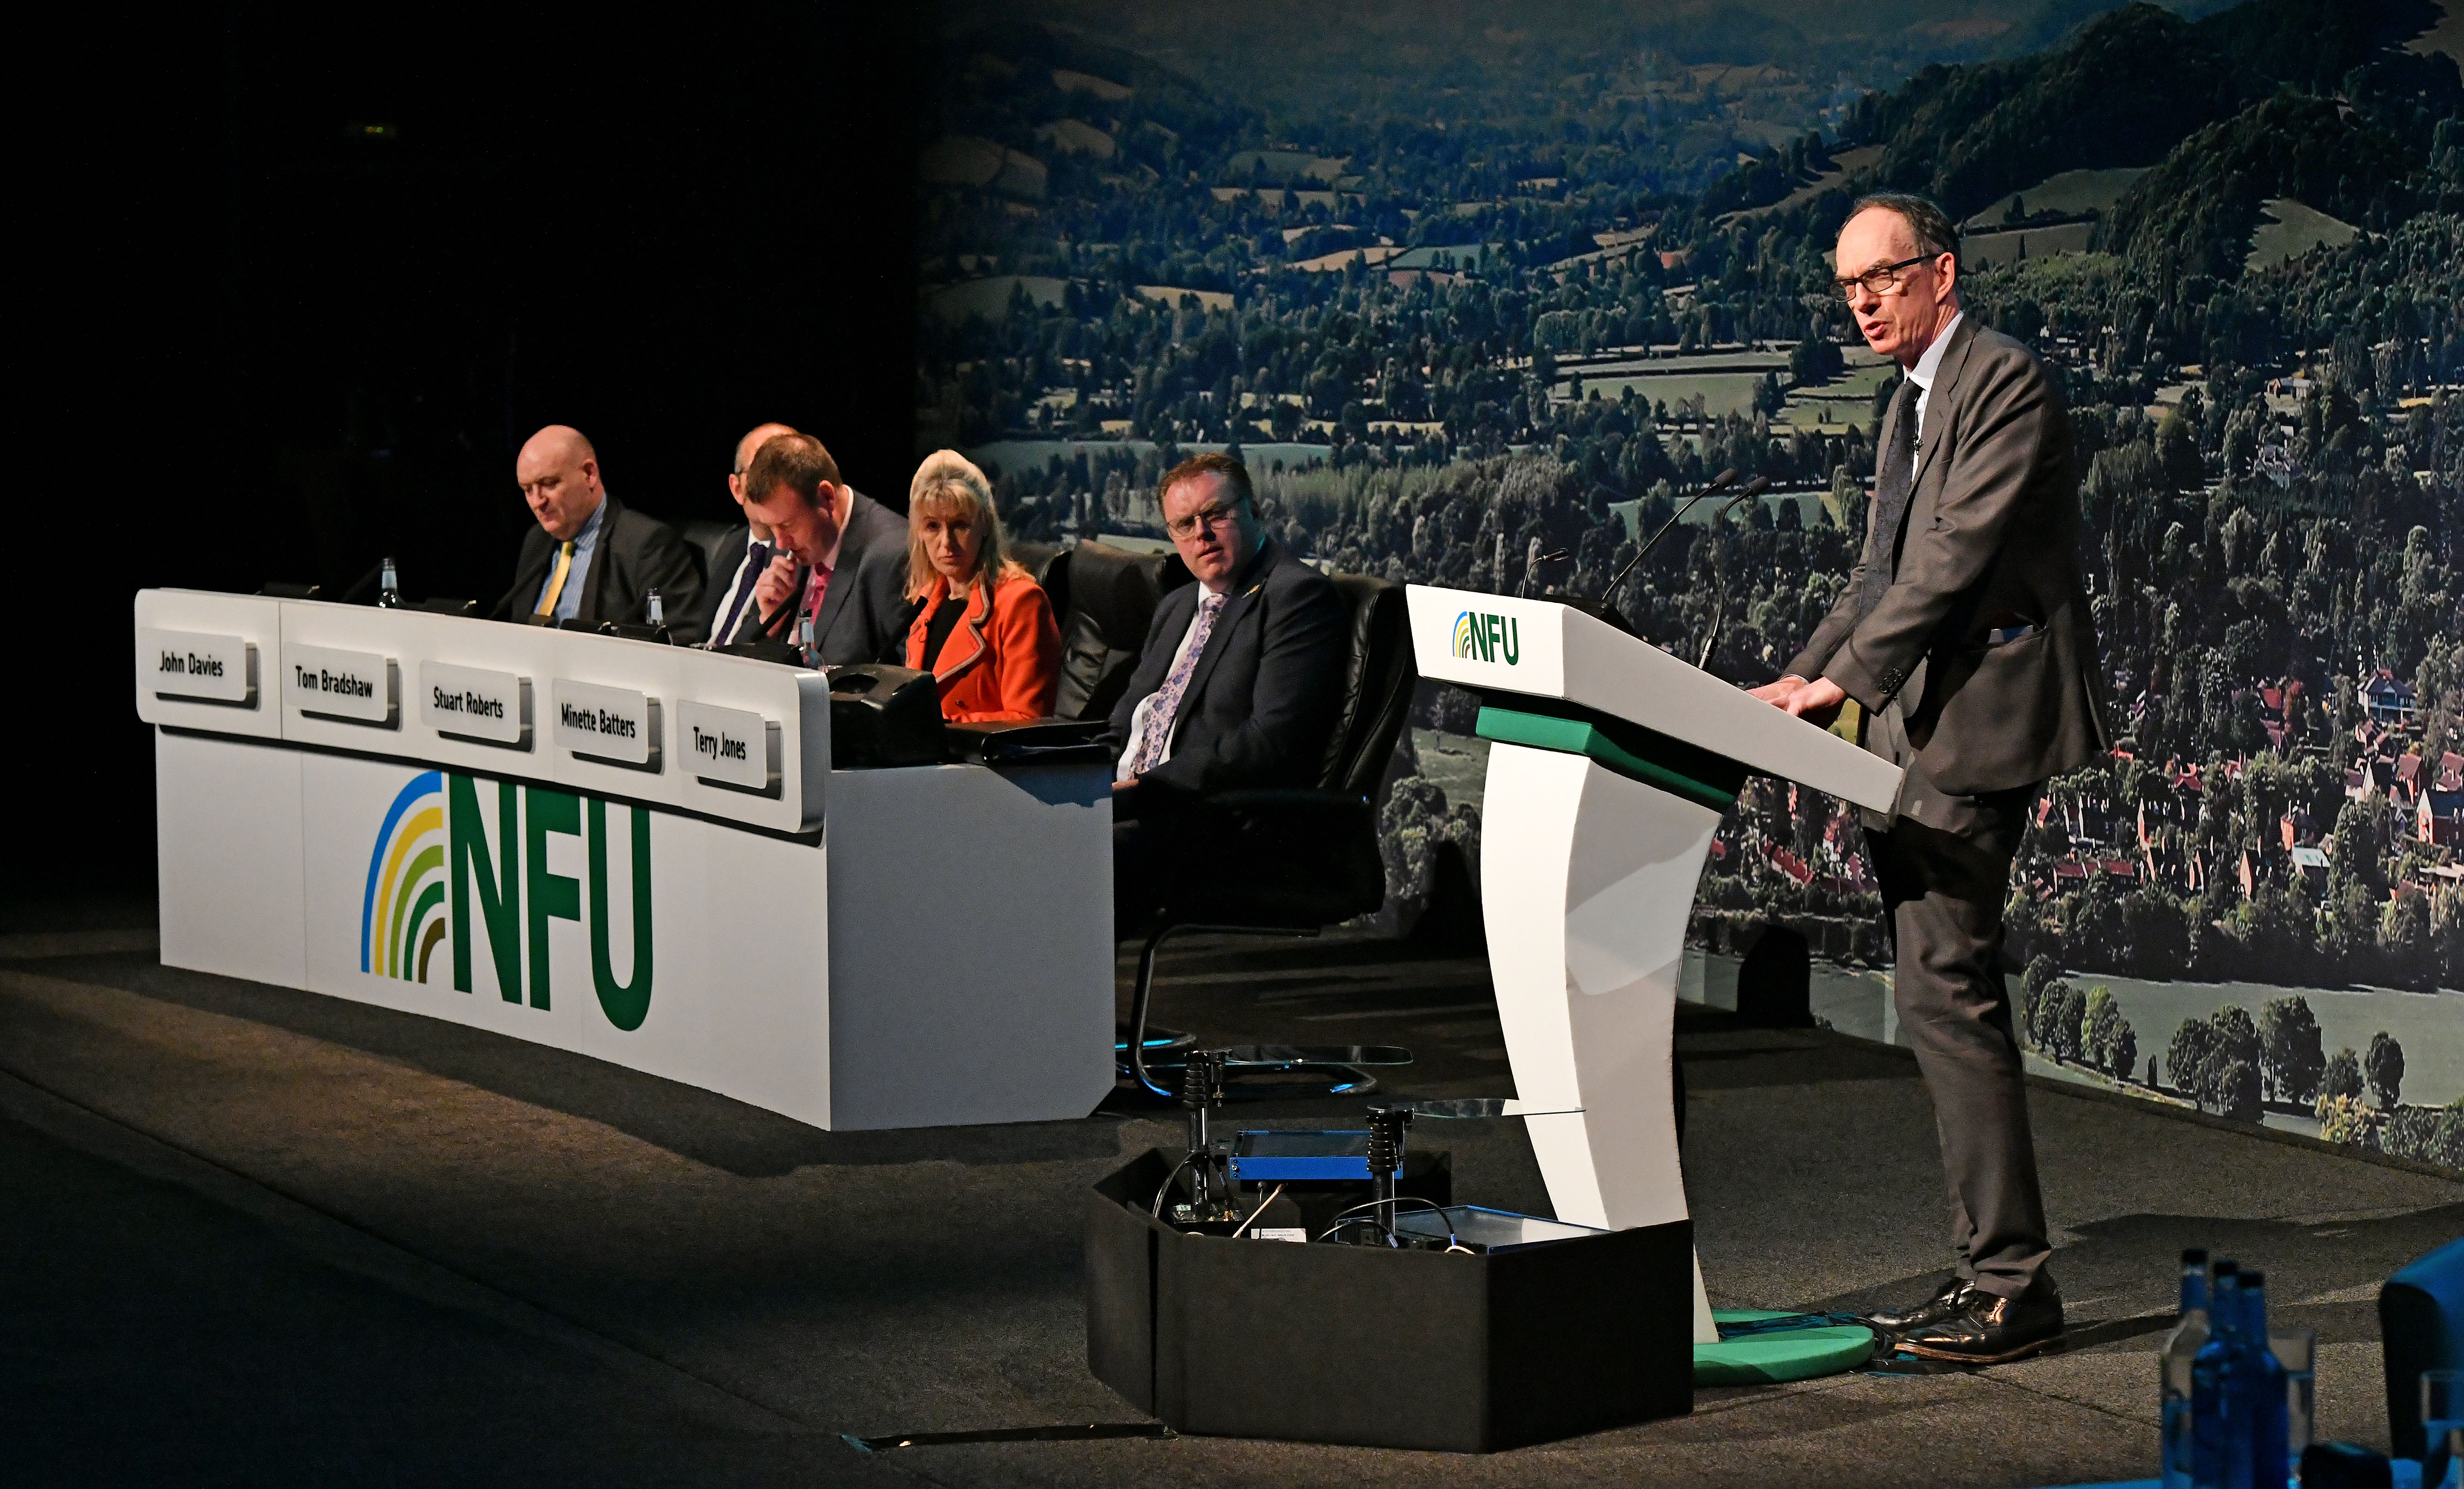 A picture of Sir David Ramsden CBE, Deputy Governor for Markets & Banking at the Bank of England, speaking at the stand at NFU Conference 2022, with the panel of speakers in the background.